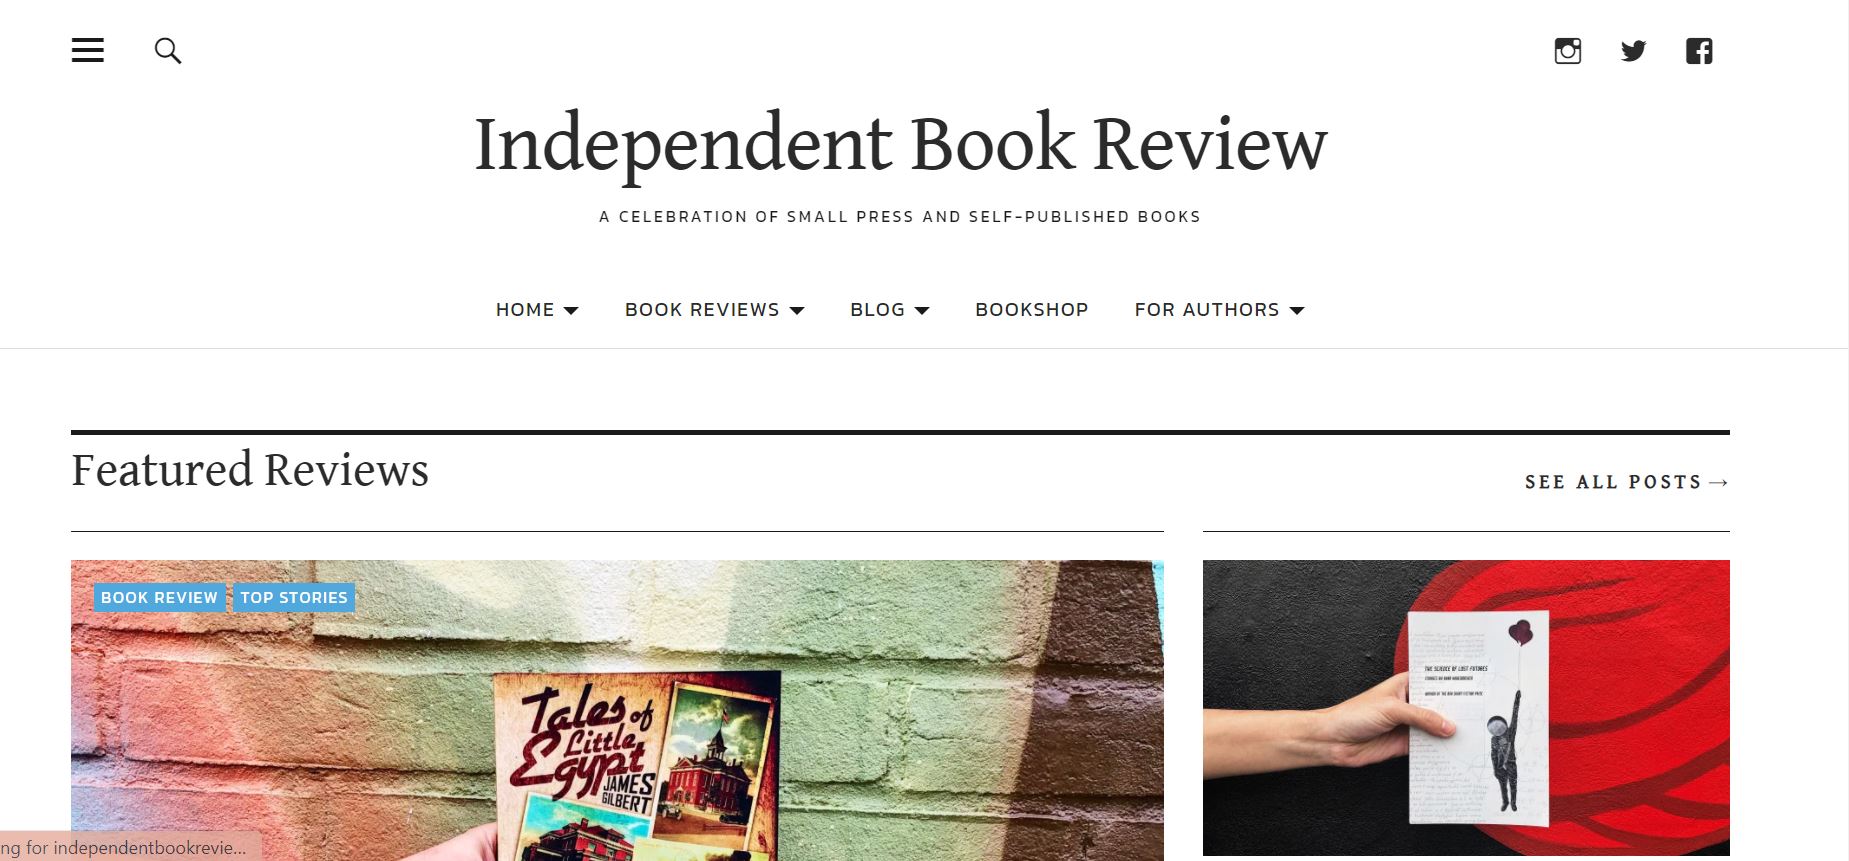 Independent Book Review